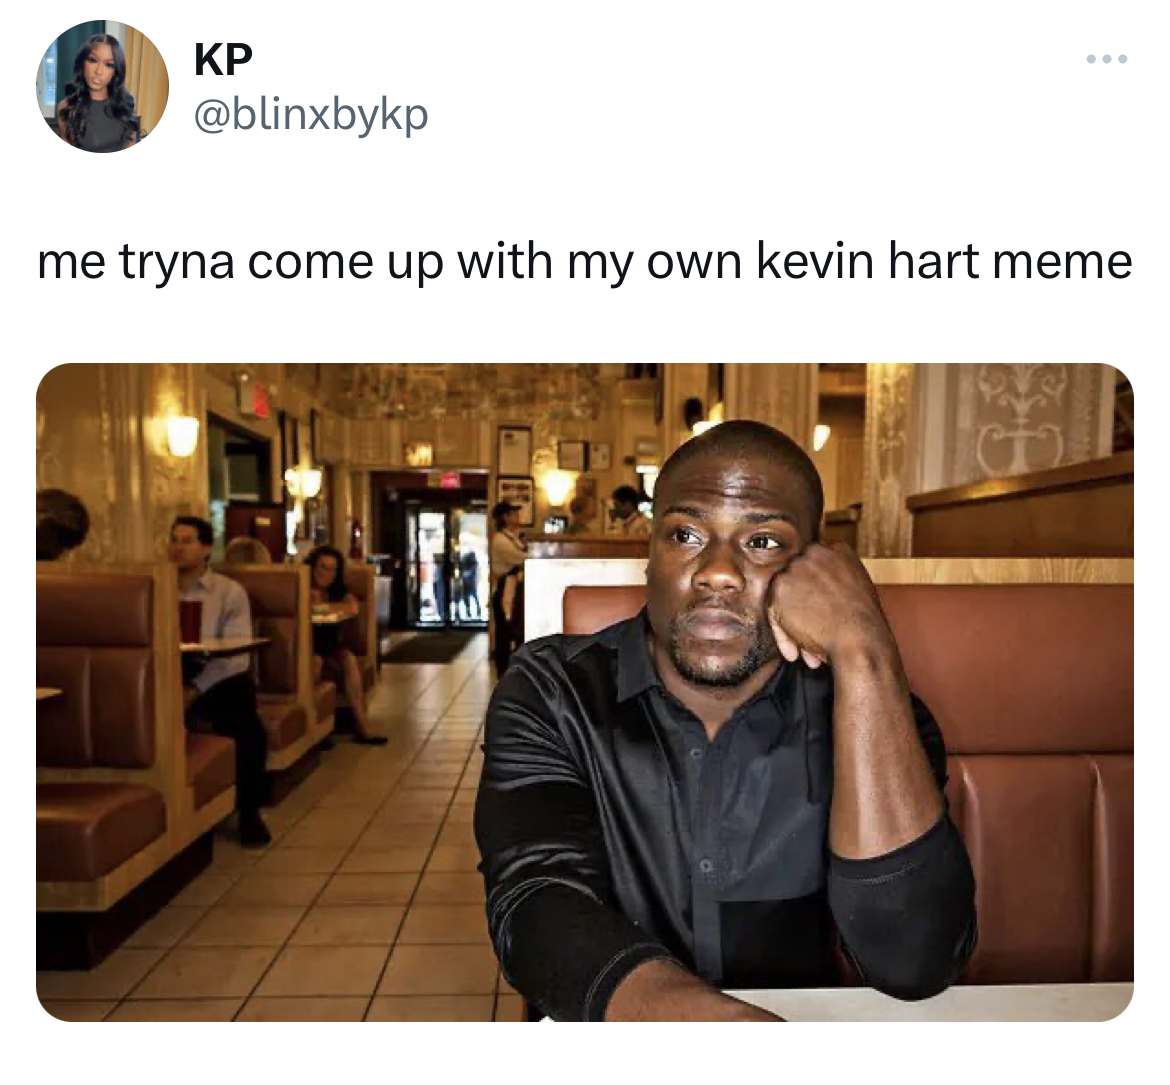 Kevin Hart trending memes - dallas cowboy hater memes - Kp me tryna come up with my own kevin hart meme